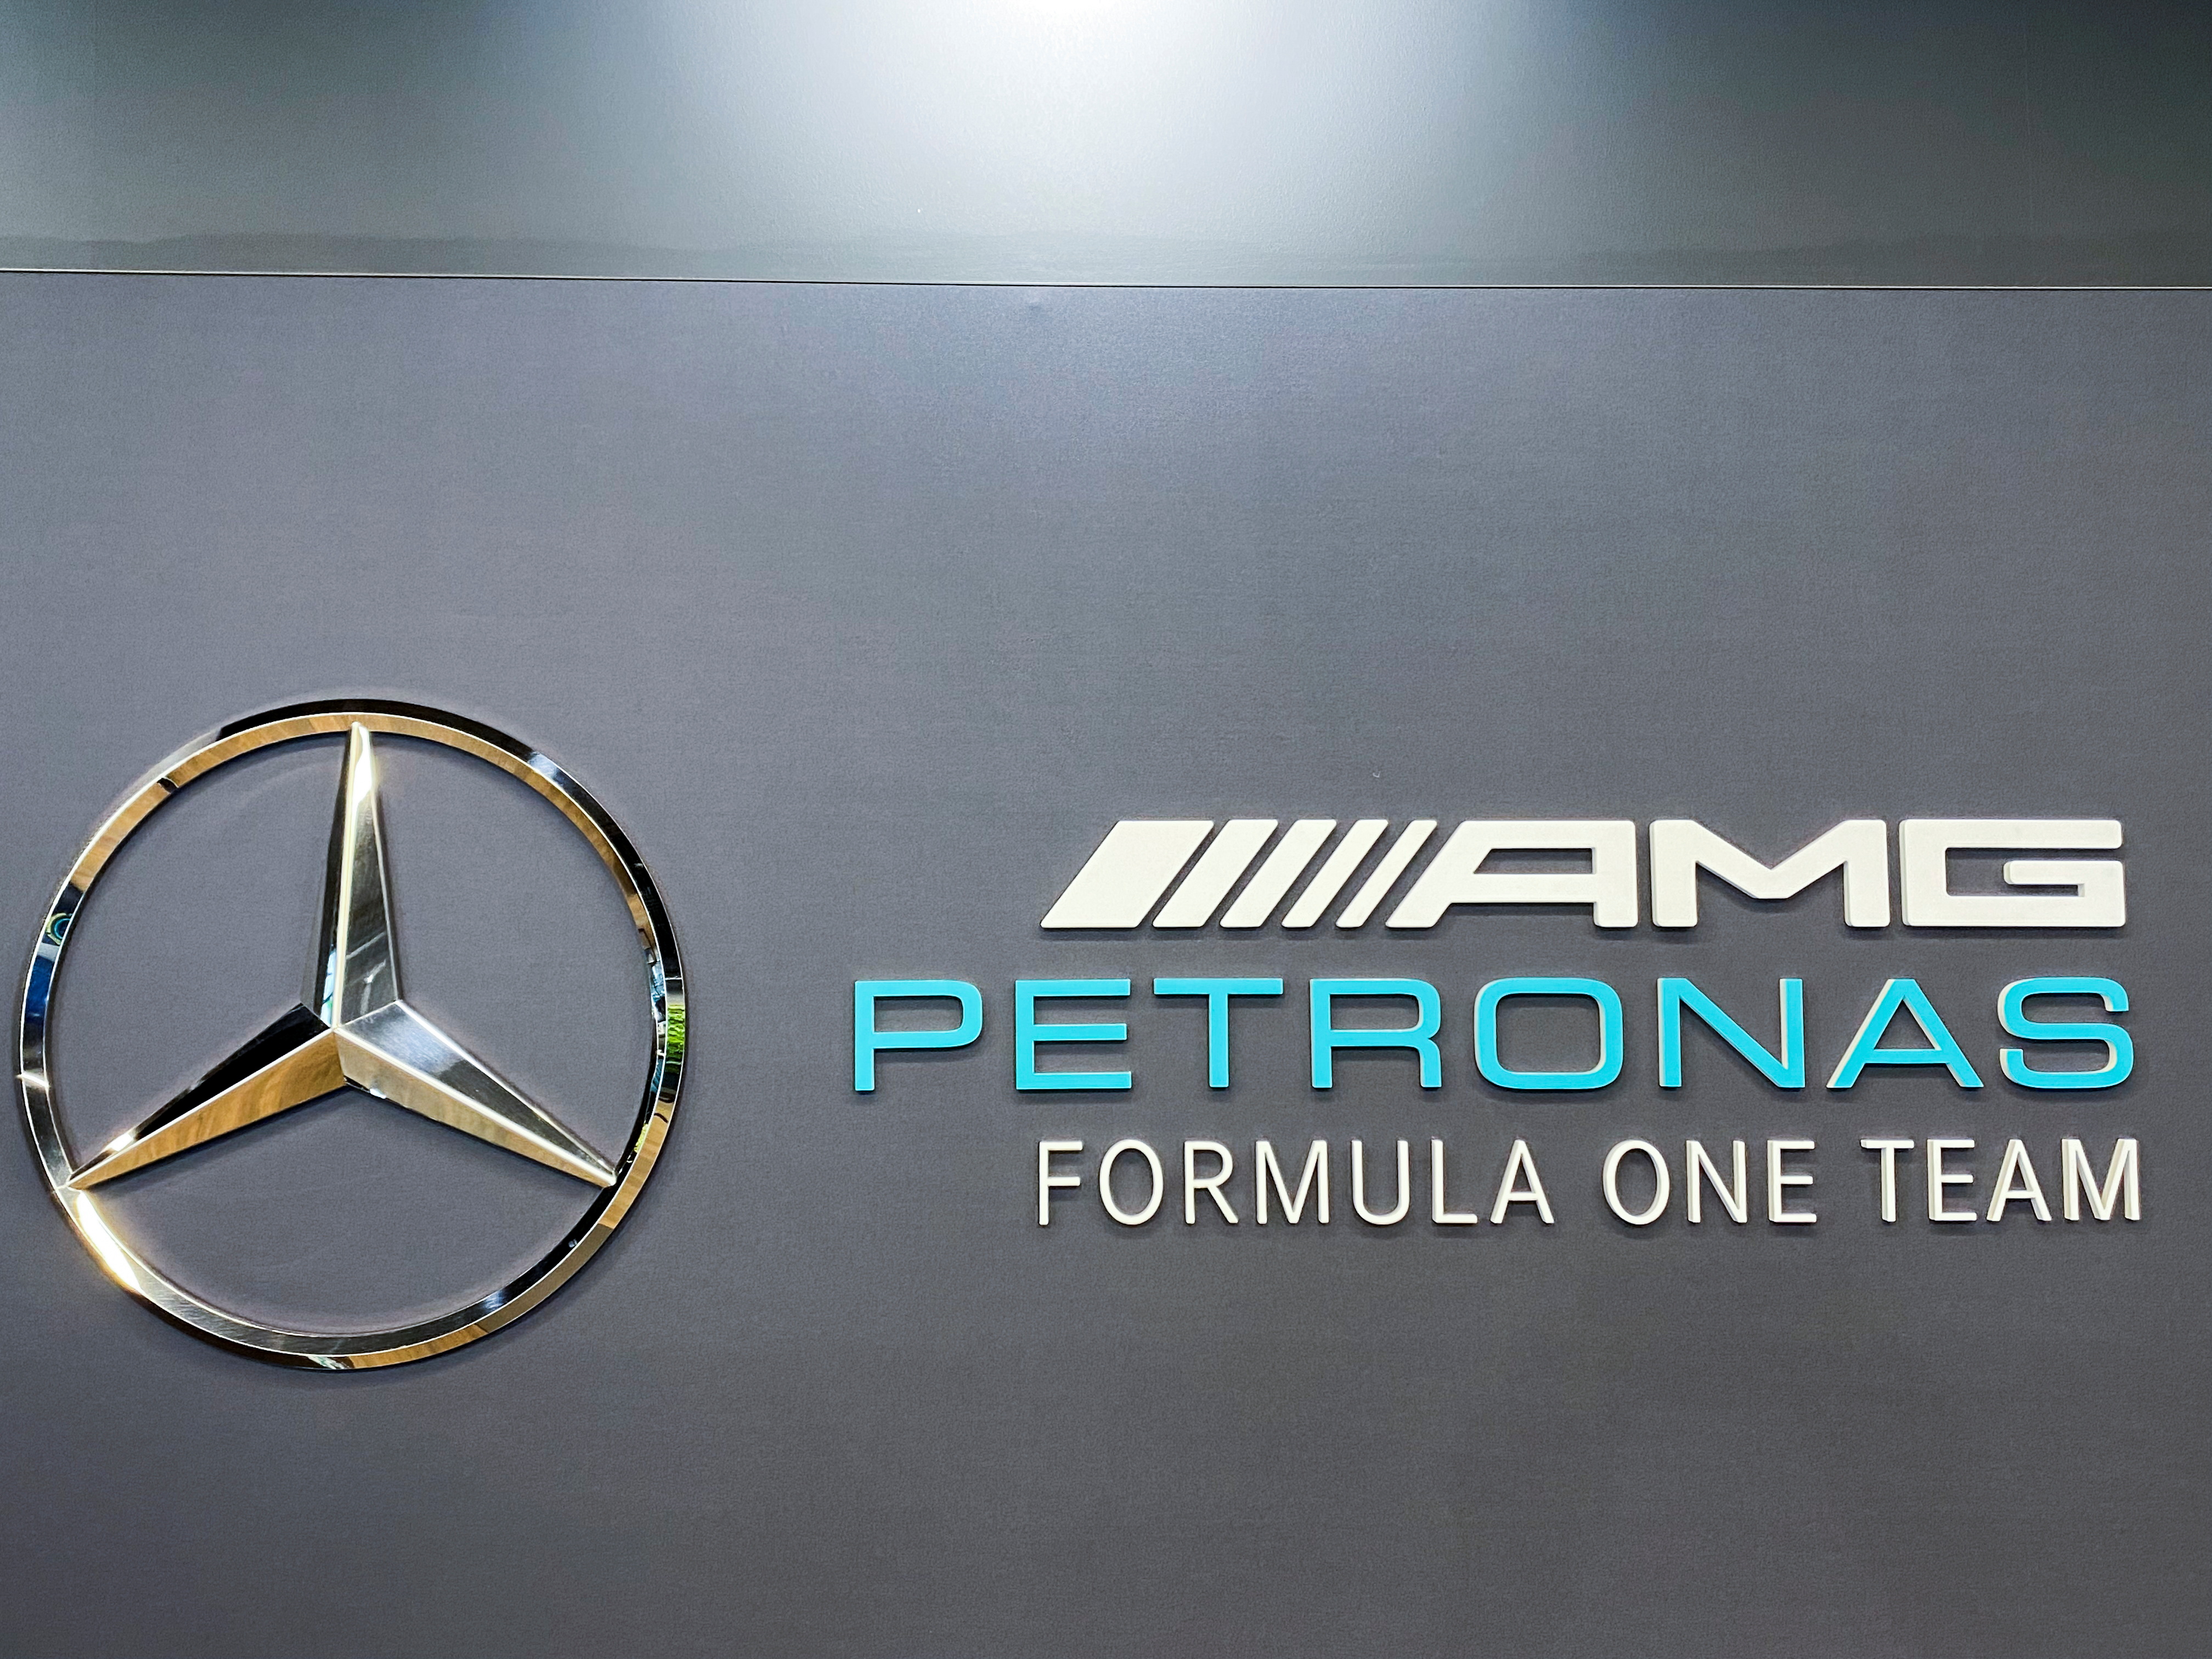 Mercedes-AMG Petronas Formula One team logo is displayed at the launch of the INEOS Britannia America's Cup challenge in Brackley